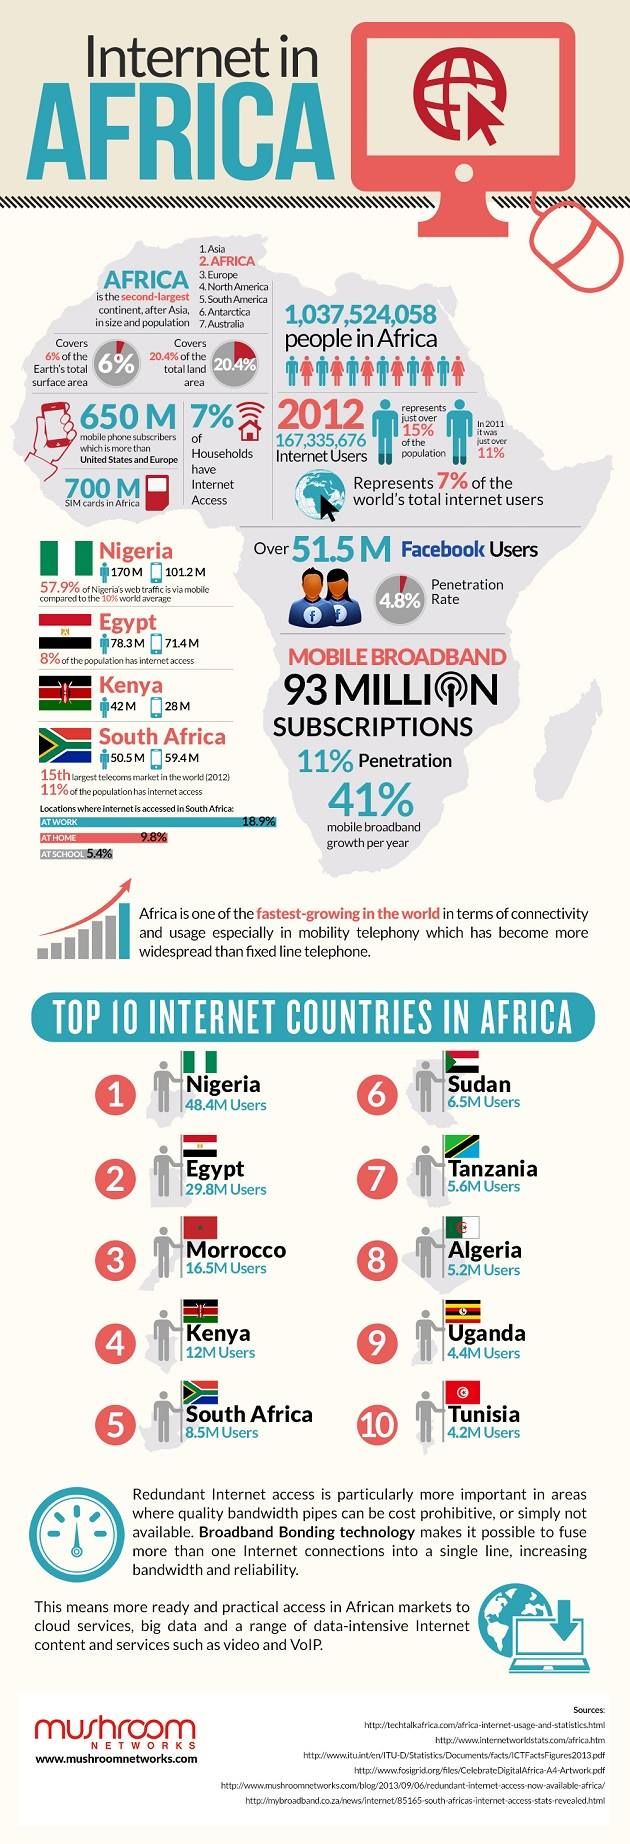 #INTERNET: EMPOWERING THE #NIGERIAN YOUTH